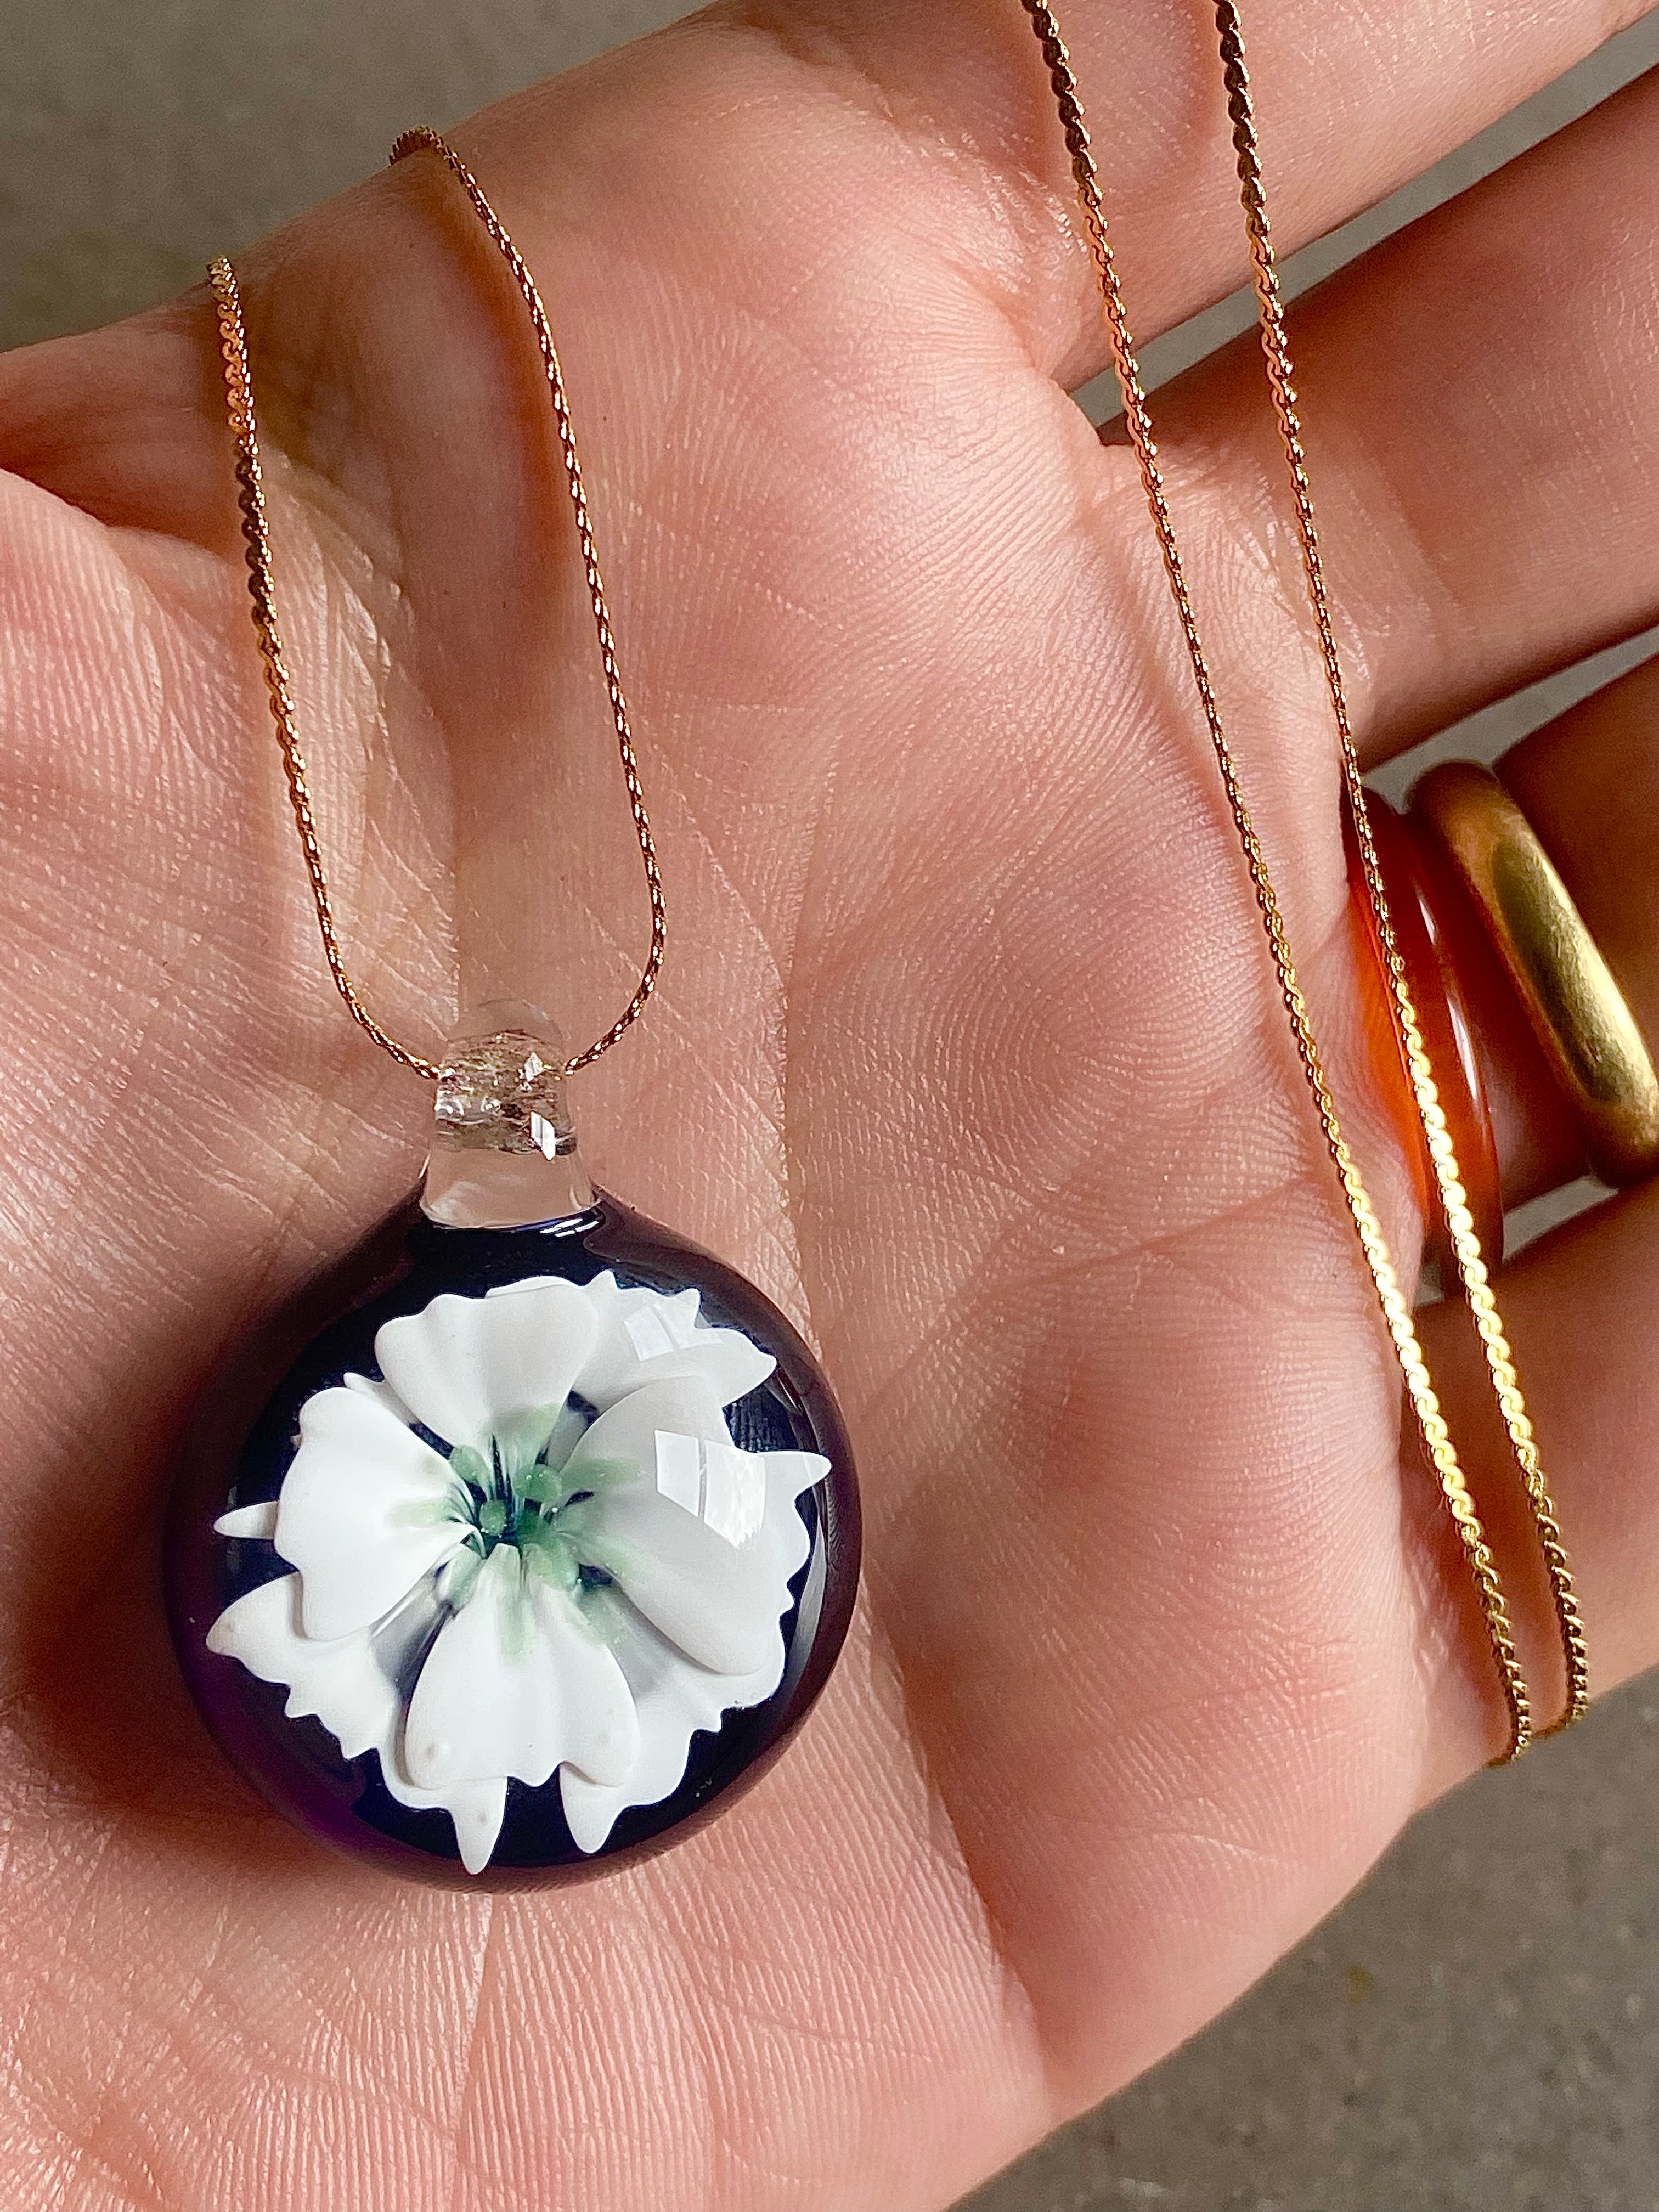 White, Green and Blue Flower Implosion Pendant